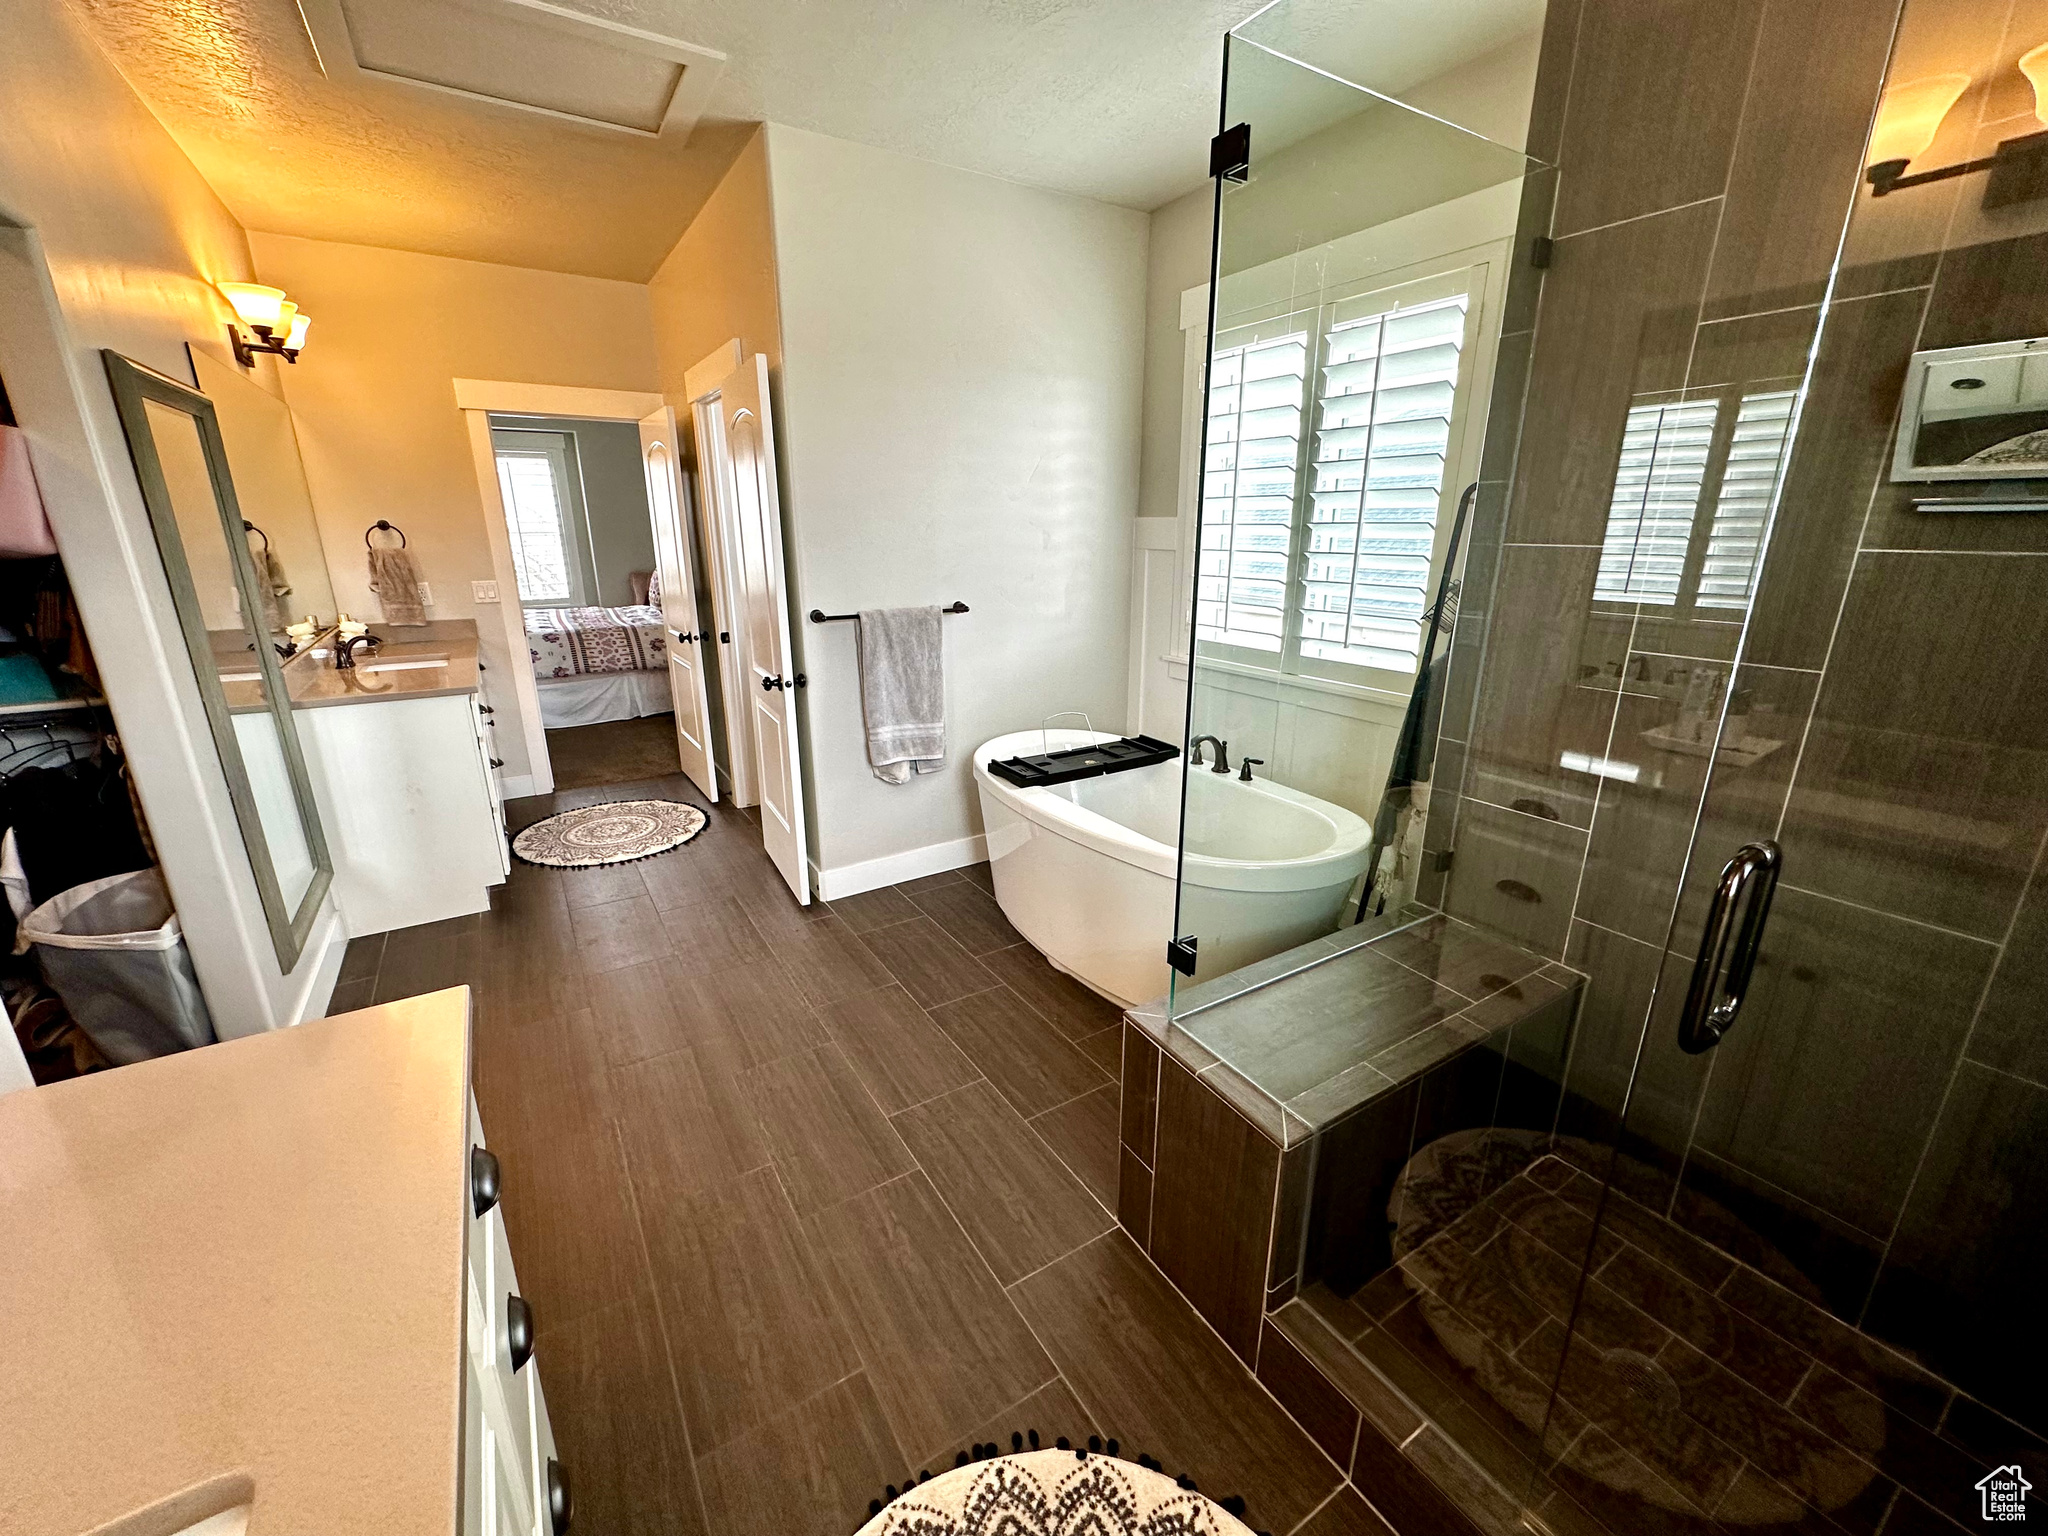 Bathroom with plenty of natural light, large vanity, and shower with separate bathtub